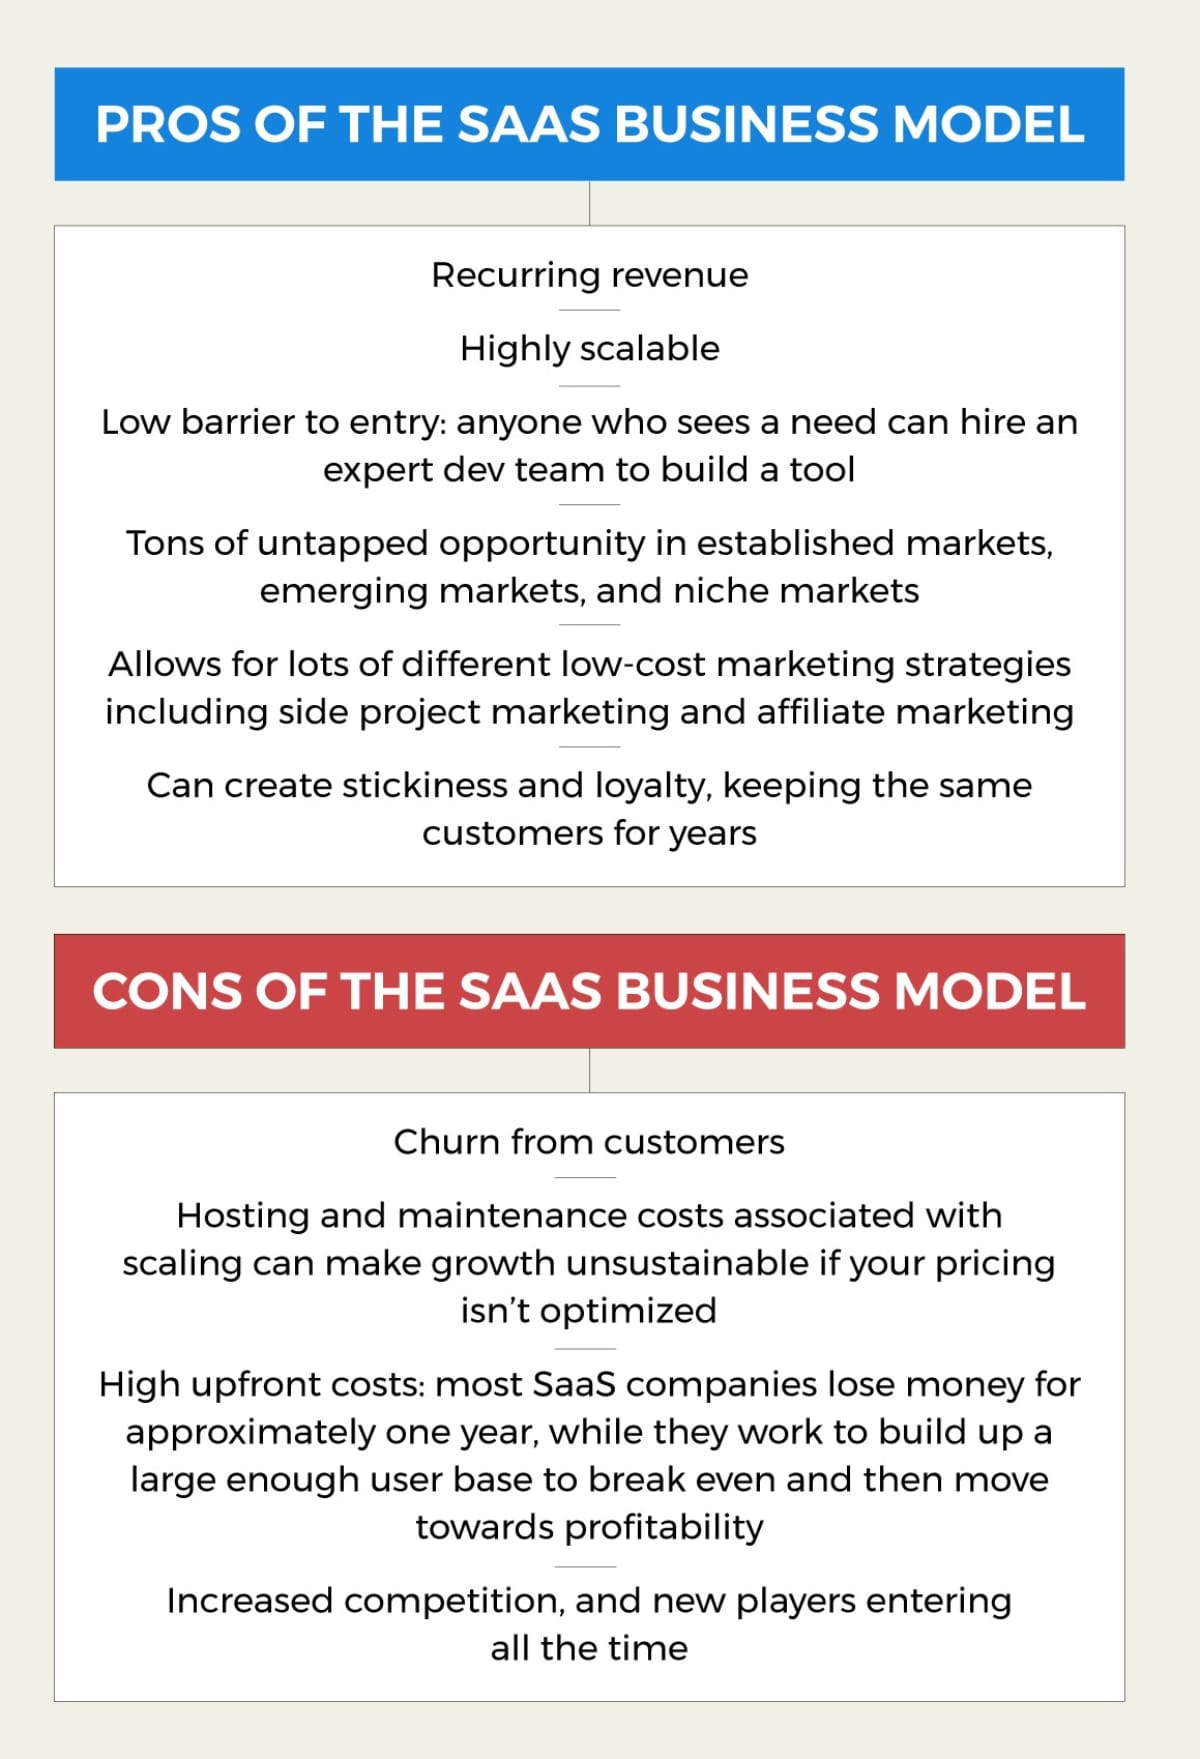 Media or SaaS: Which Company Should You Build?